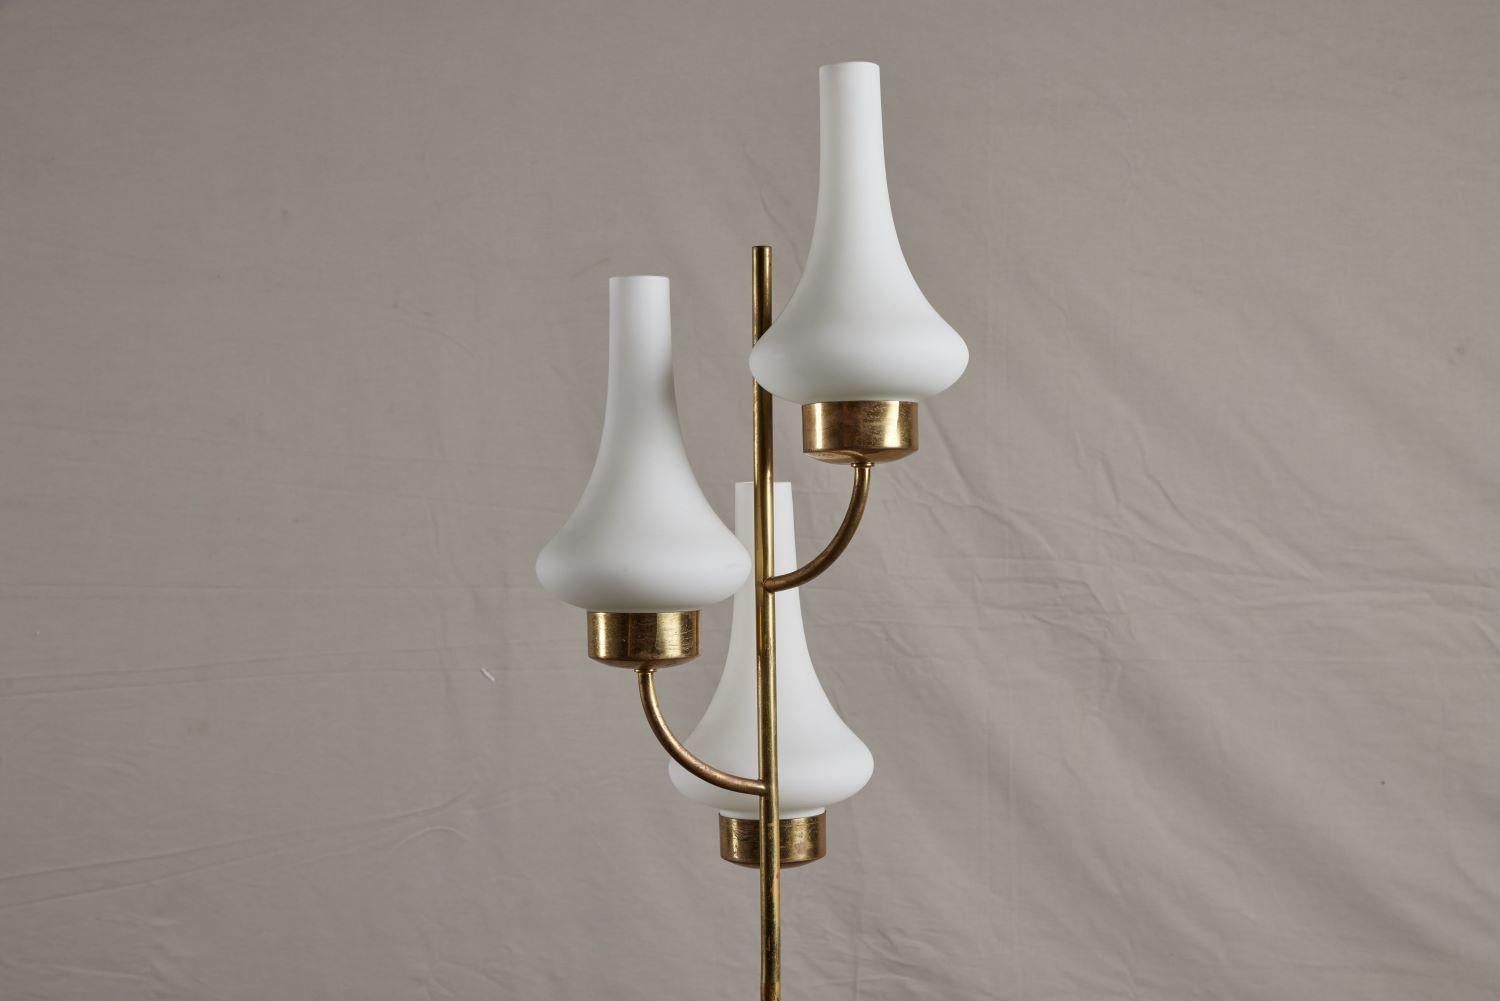 20th Century Mid-Century Modern Stilnovo Floor Lamp with 3 Arms For Sale